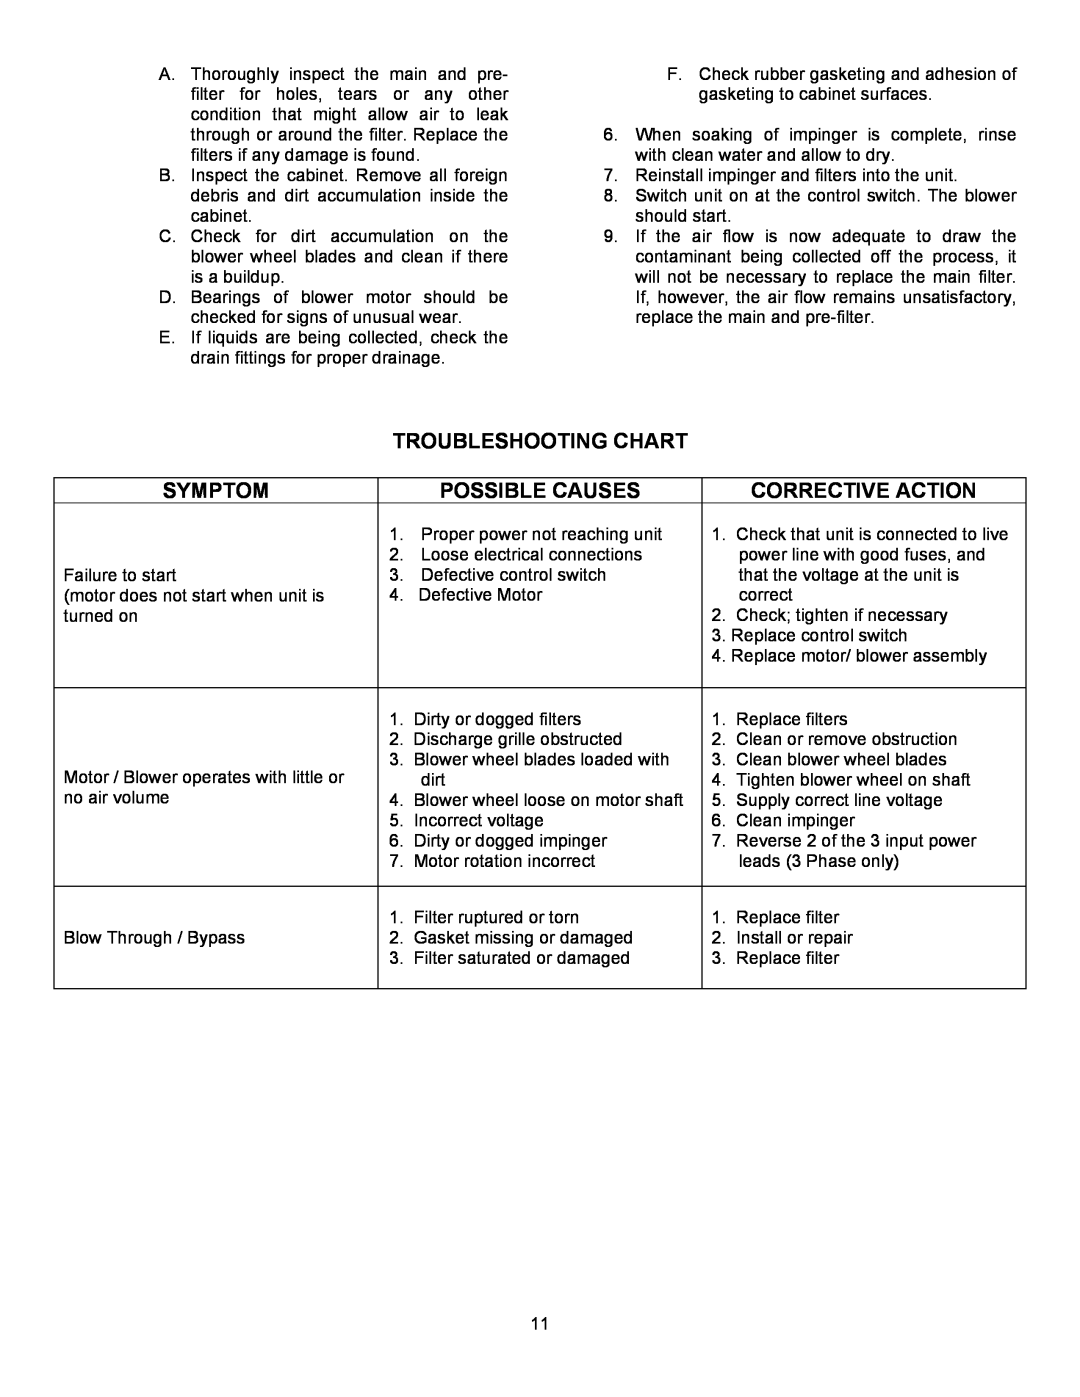 Trion 600M manual Troubleshooting Chart, Symptom, Possible Causes, Corrective Action 